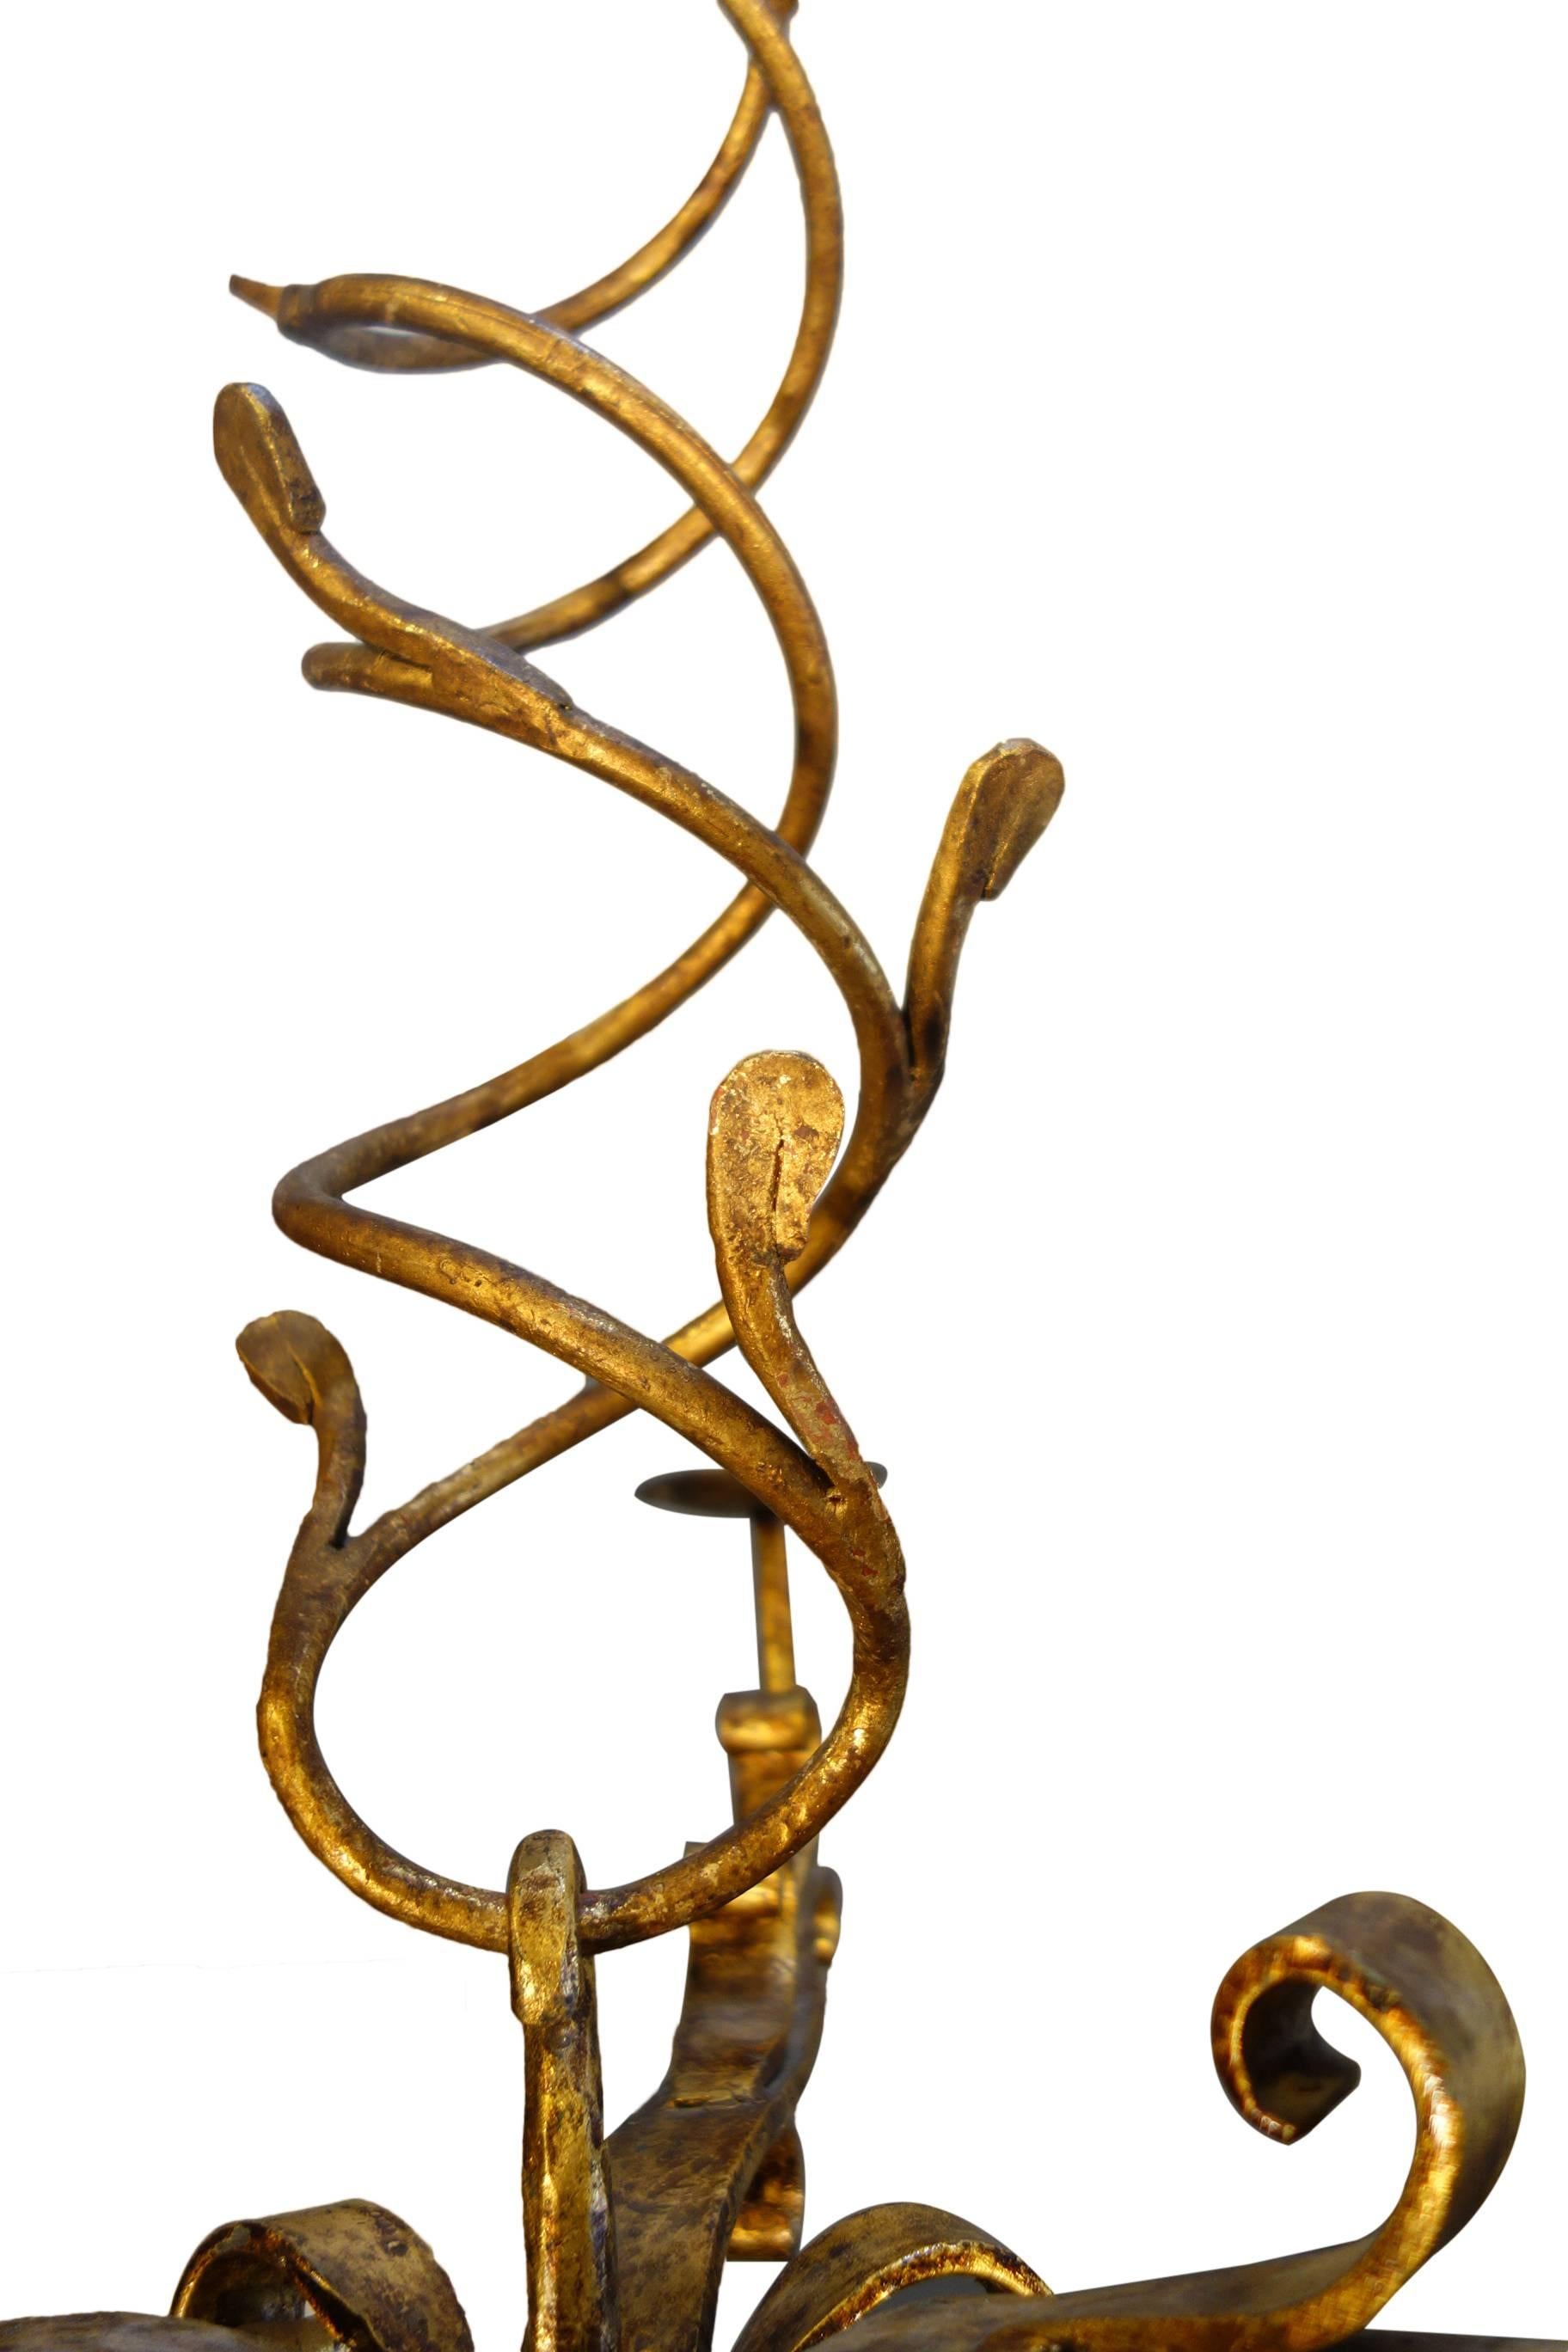 Italian Mid-Century Nouveau chandelier, hand-forged wrought iron and gold gilded; a descending gold stylized plant spiral "vine" supporting three lights.

Available as a similar fixture with four lights on a coupled straight arm, for